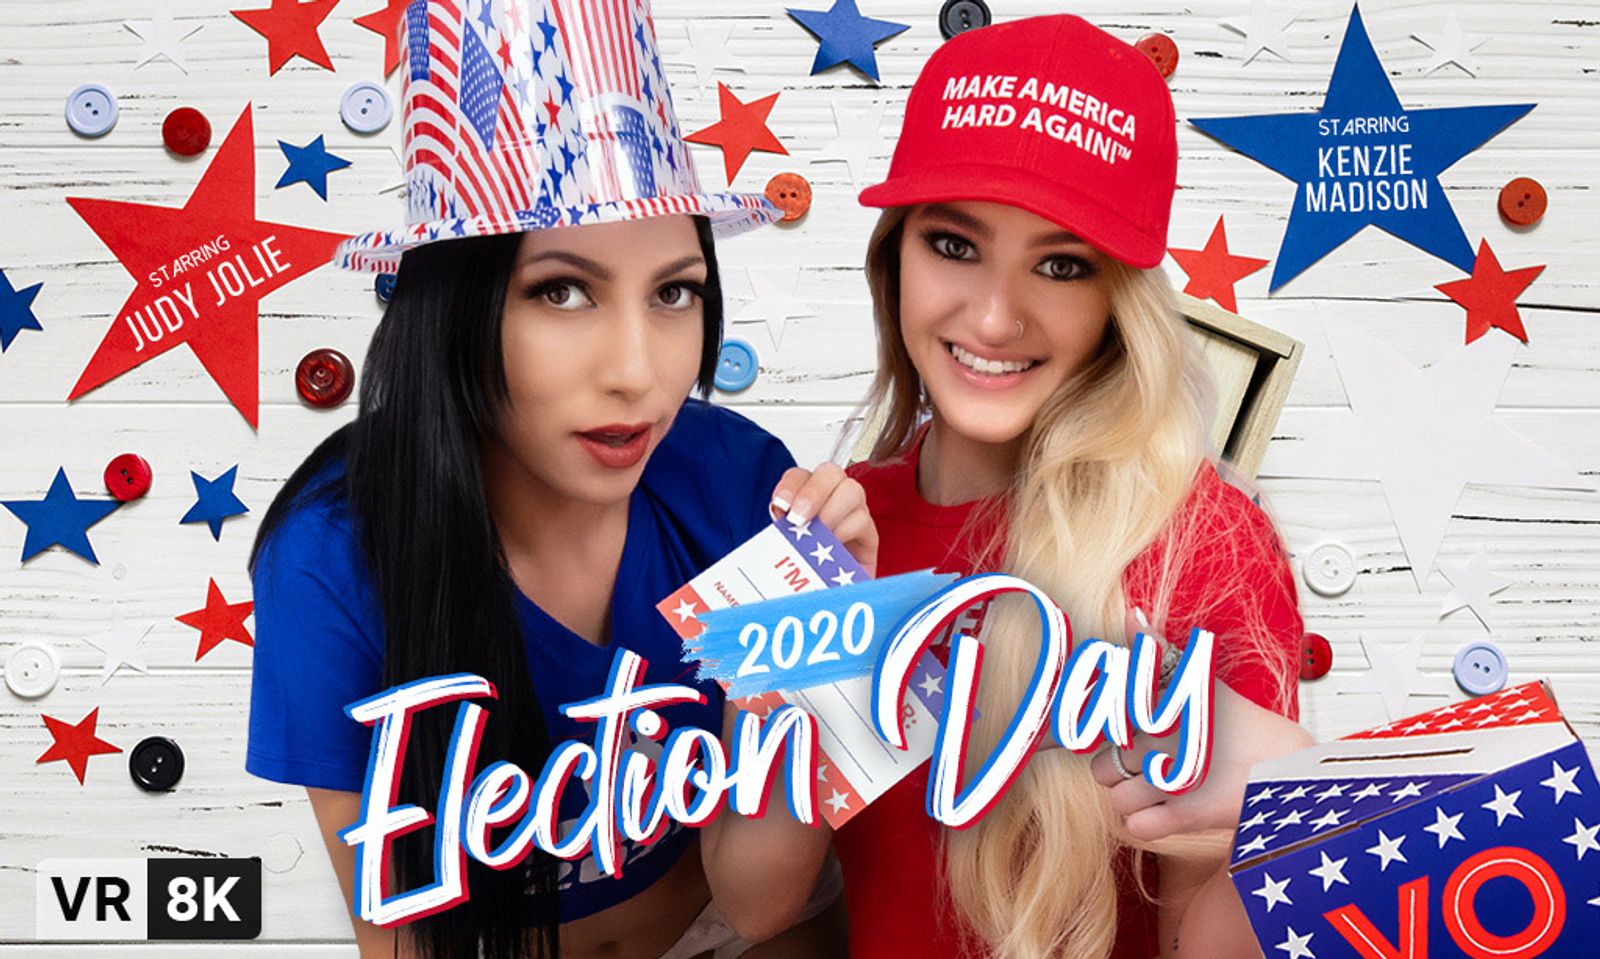 VR Bangers Offers 2 New Scenes for Election Day & Beyond